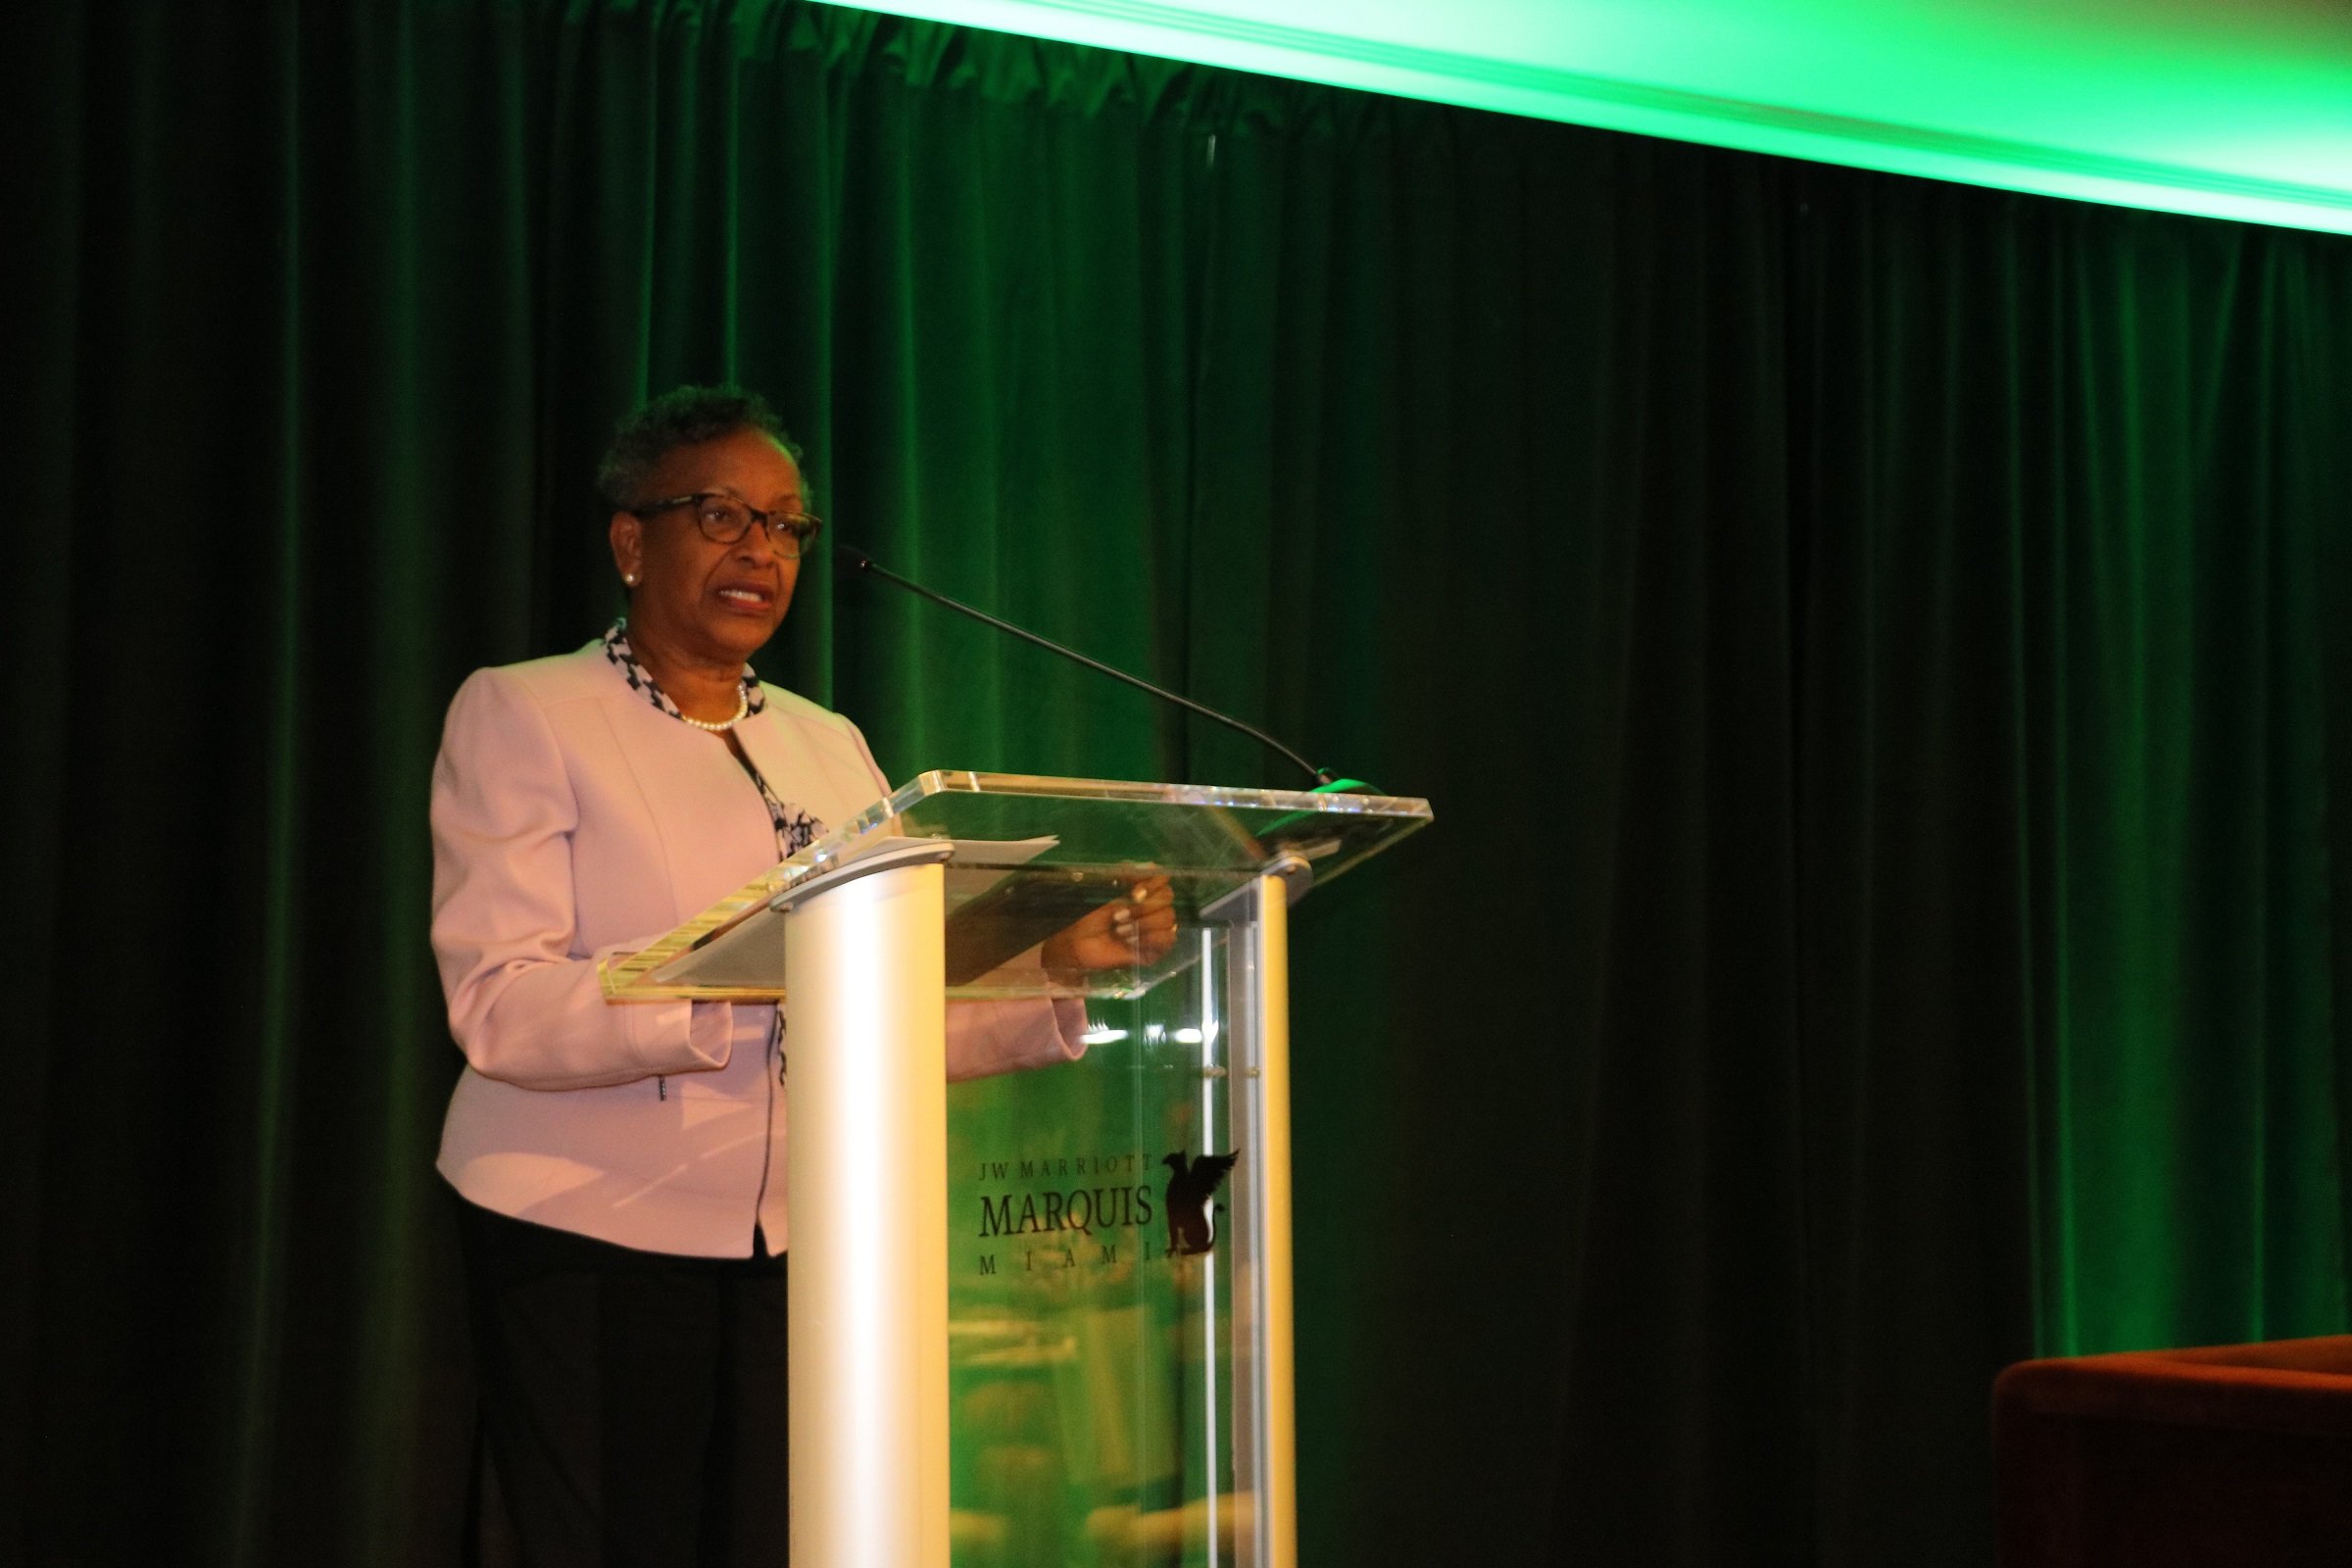 Tessa Williams-Robertson, Head of CDB’s Renewable Energy / Energy Efficiency Unit, delivers welcome remarks at the Utility Leaders Workshop at CREF on October 18, 2017.